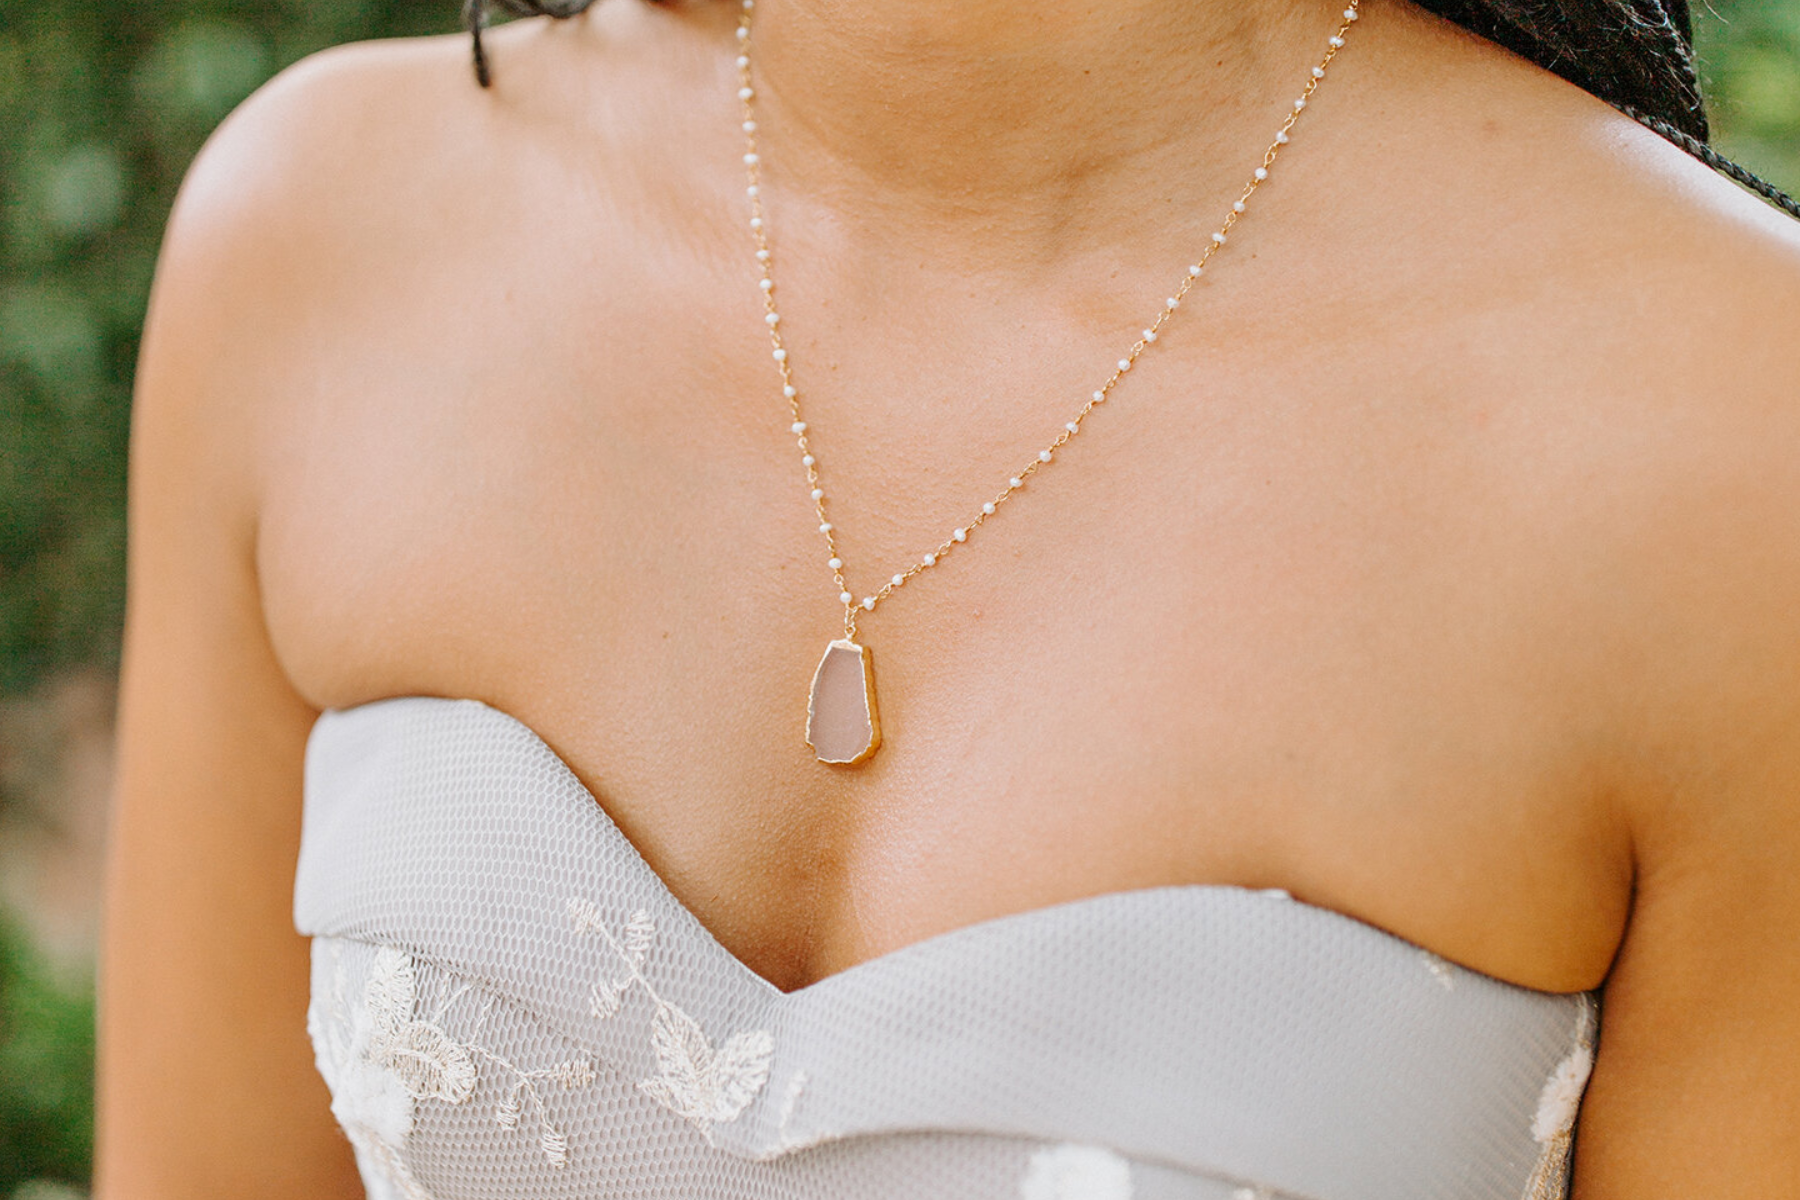 A bridesmaid with a platinum necklace